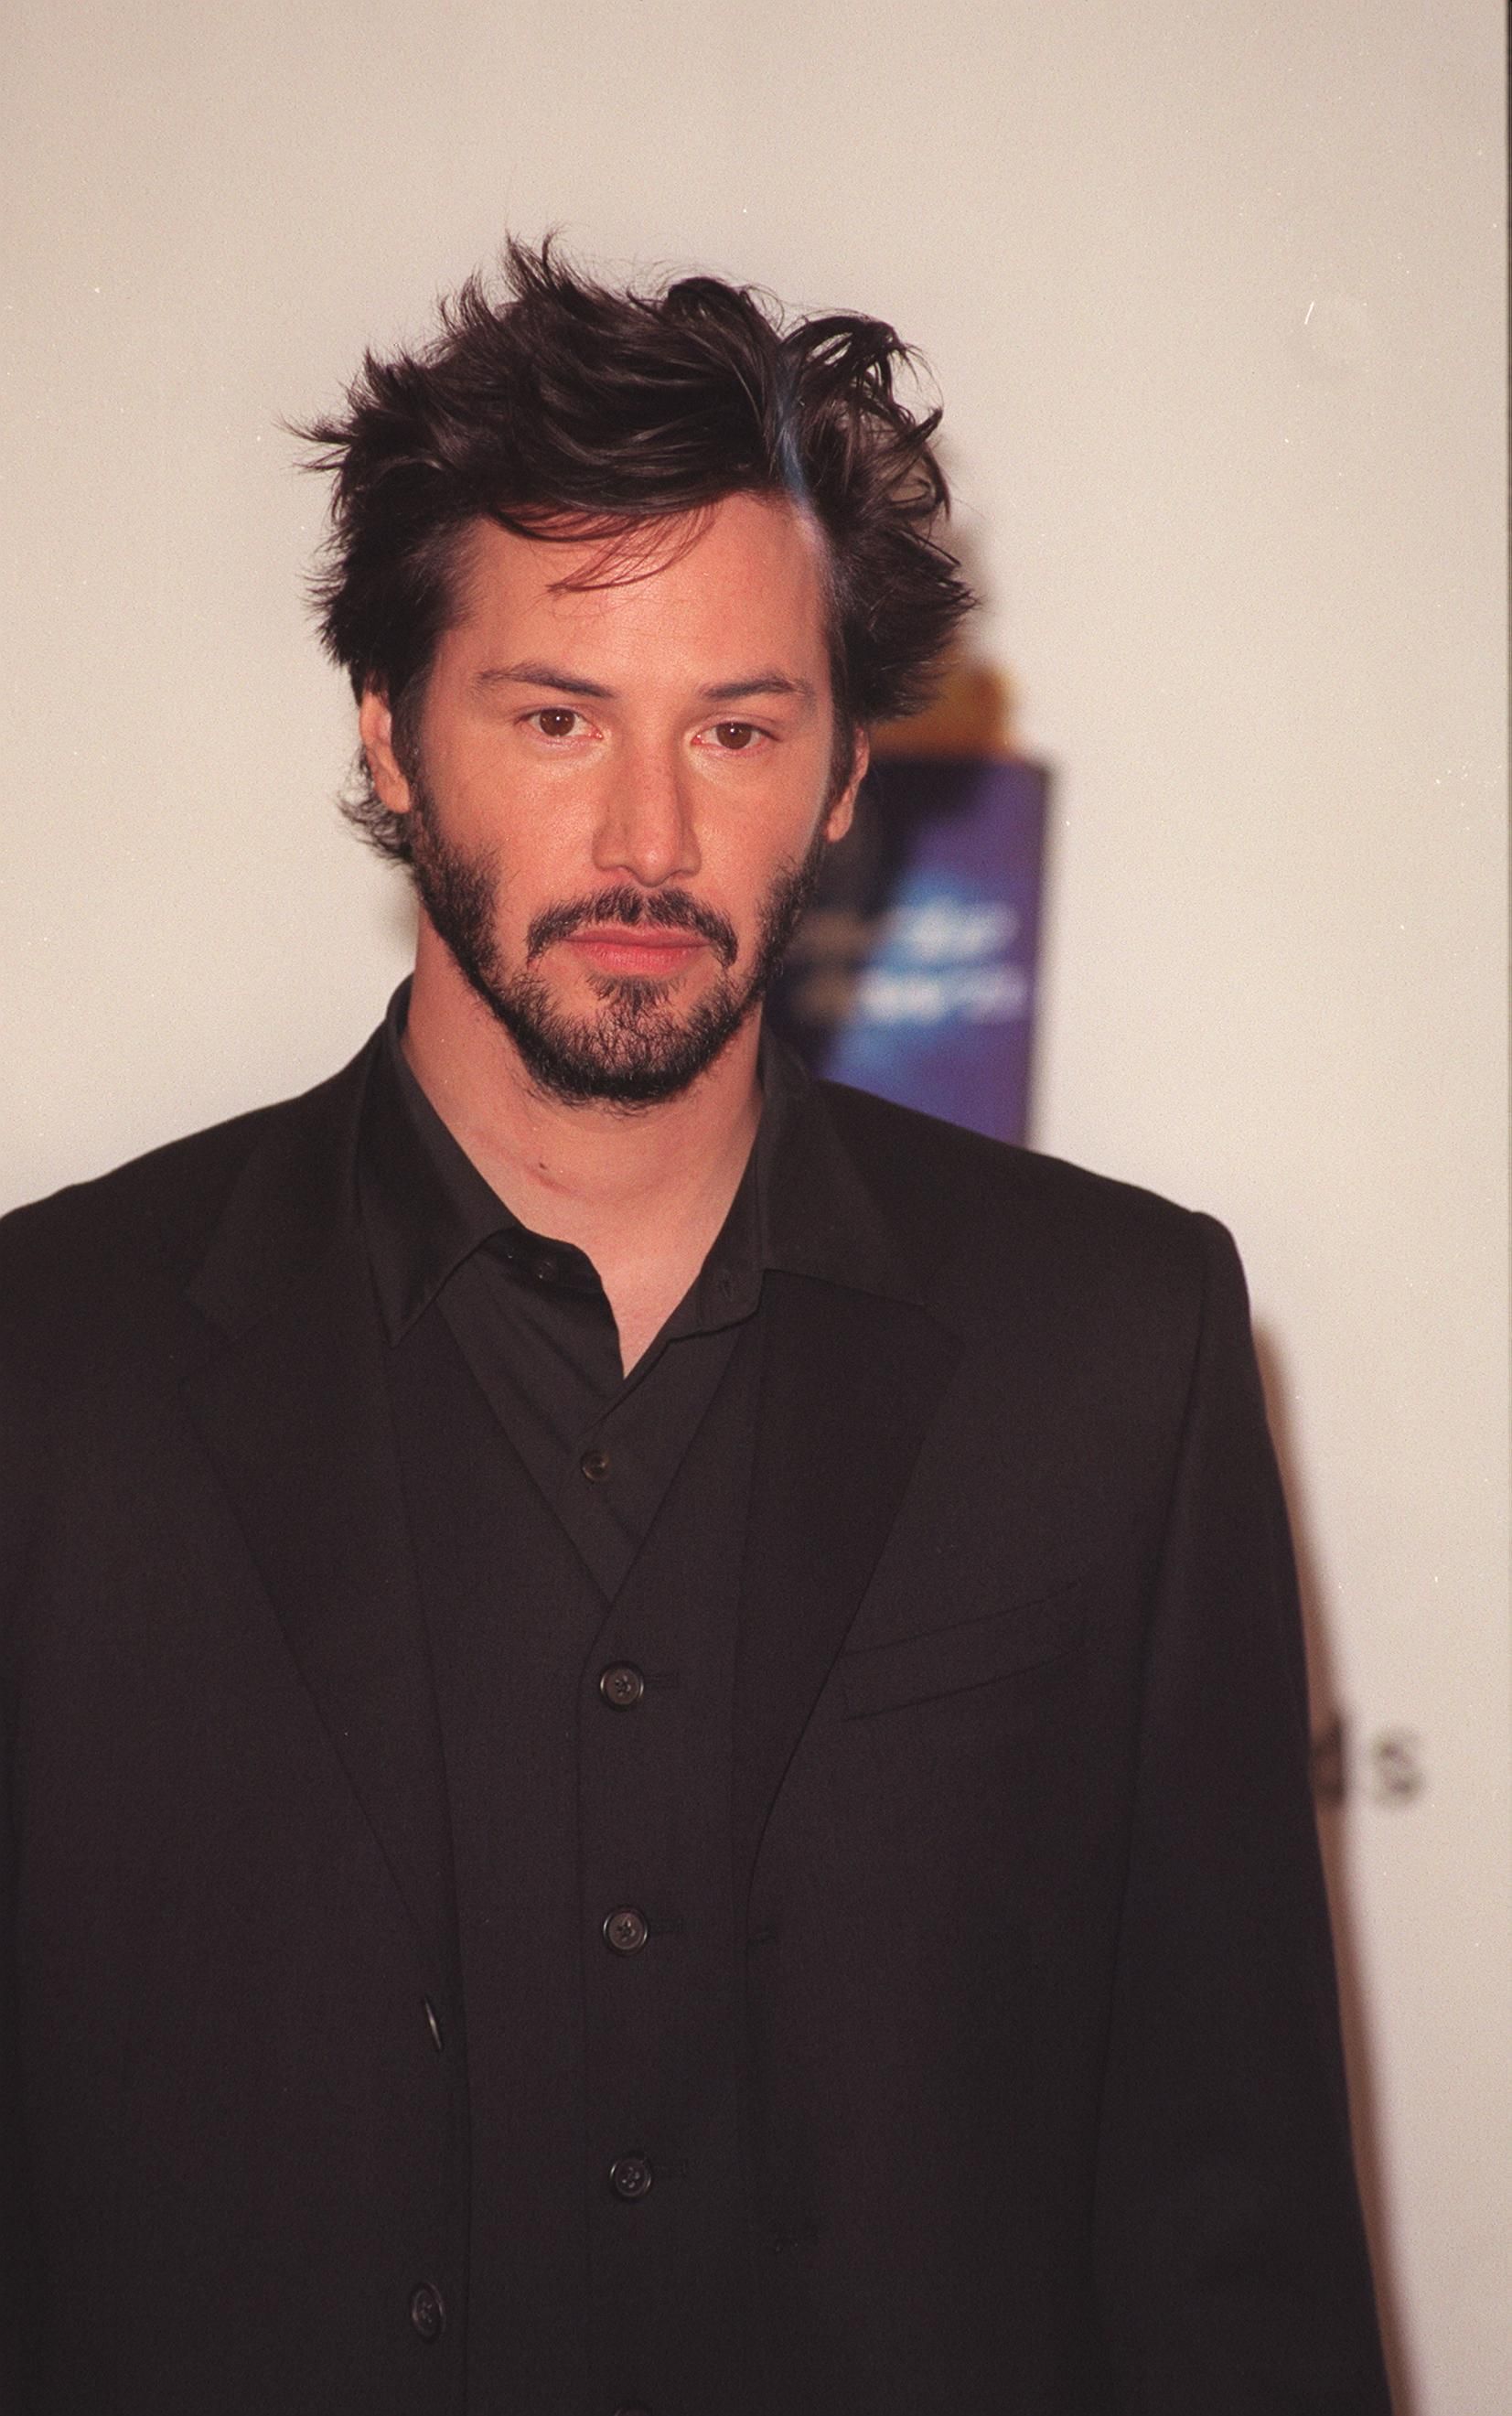 The Matrix 4 Keanu Reeves New Haircut Is Going To Make Fans Very Happy   Cinemablend